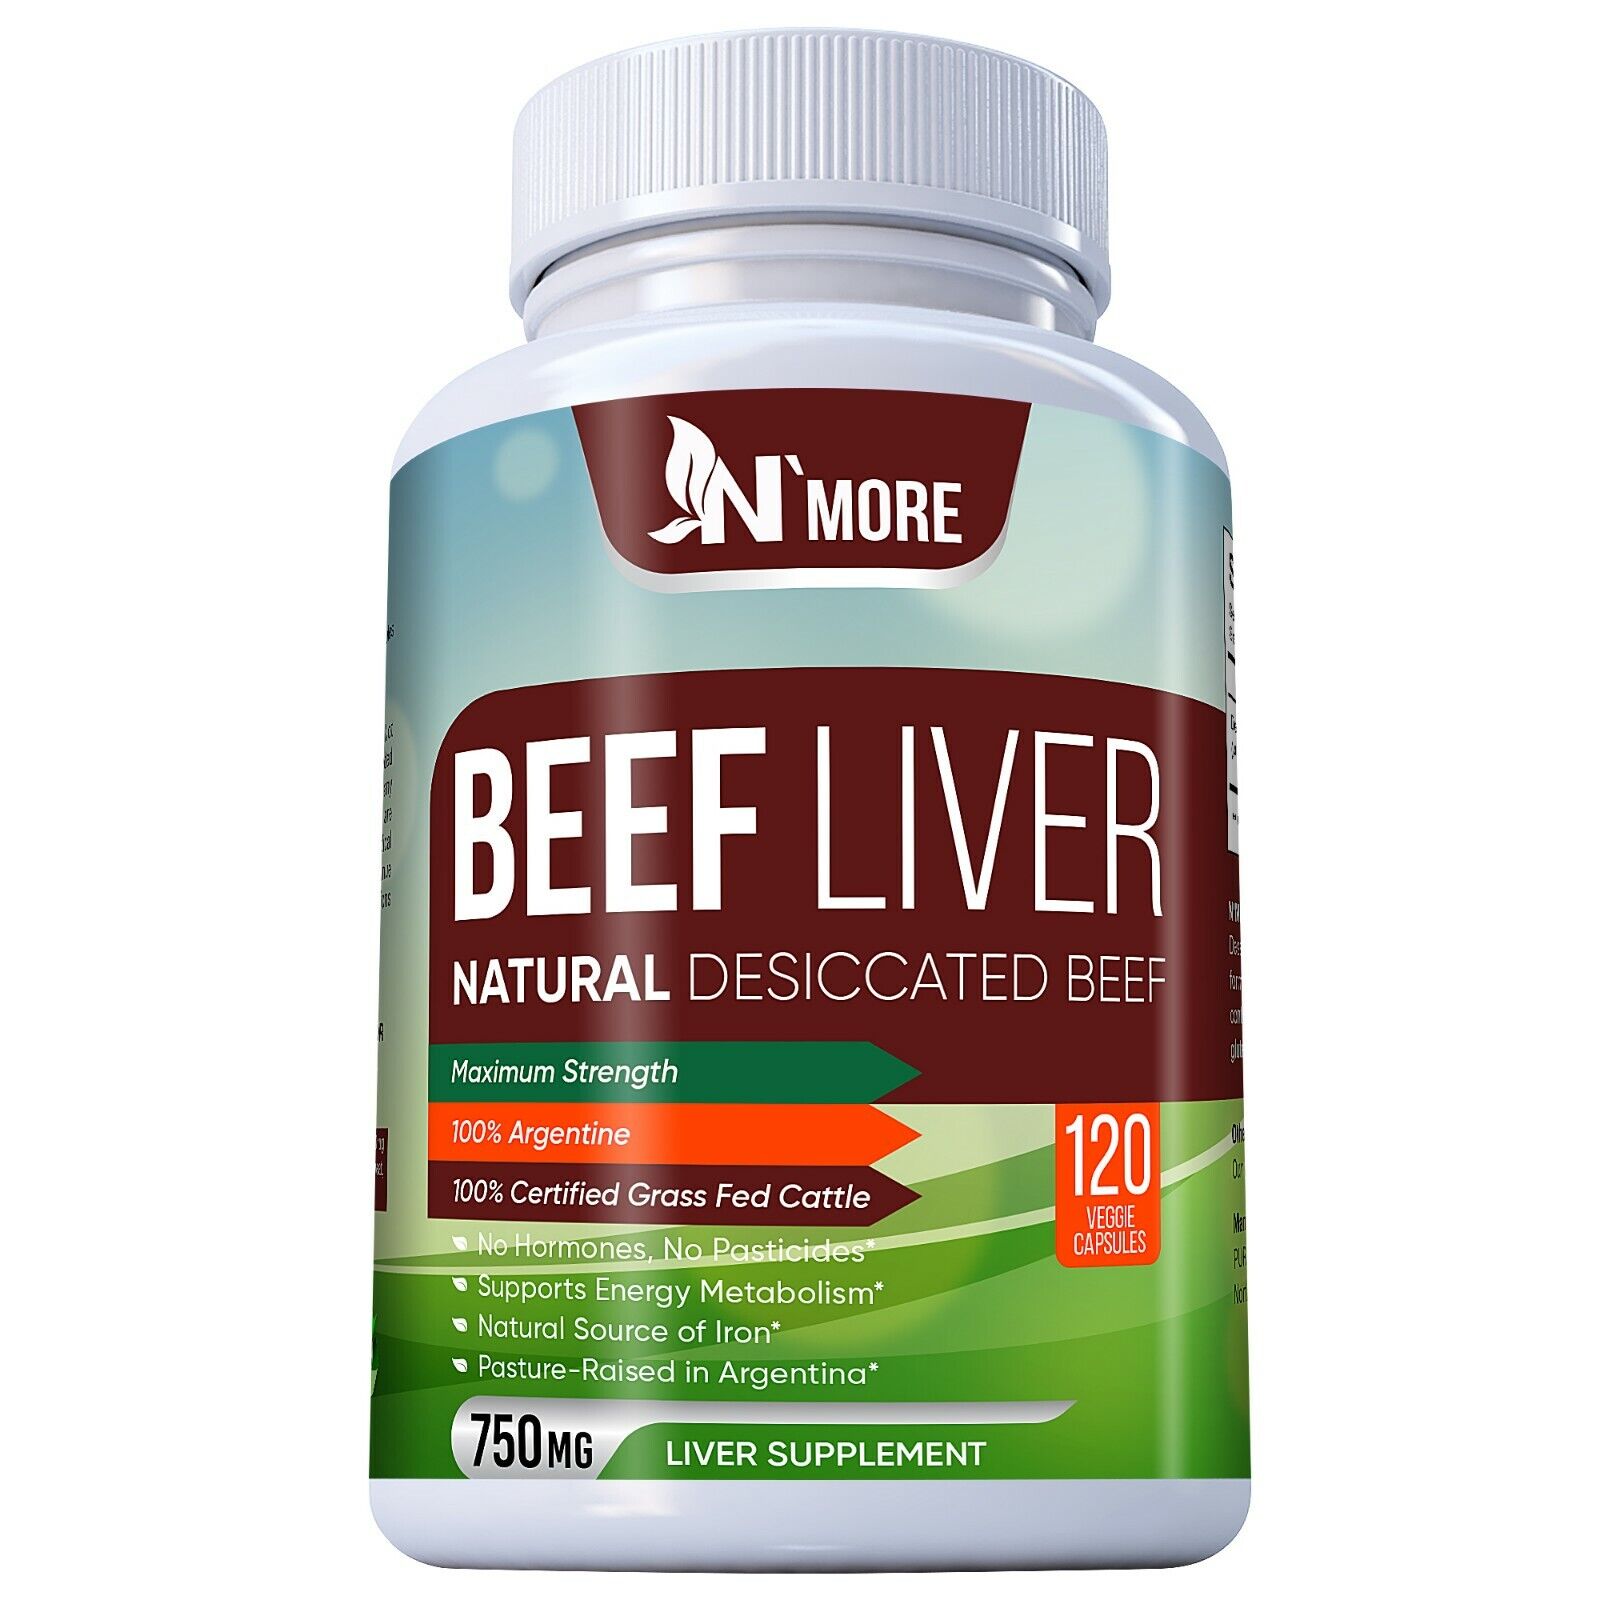 Desiccated Beef Liver Capsules, Certified 100% Grass Fed Undefatted 